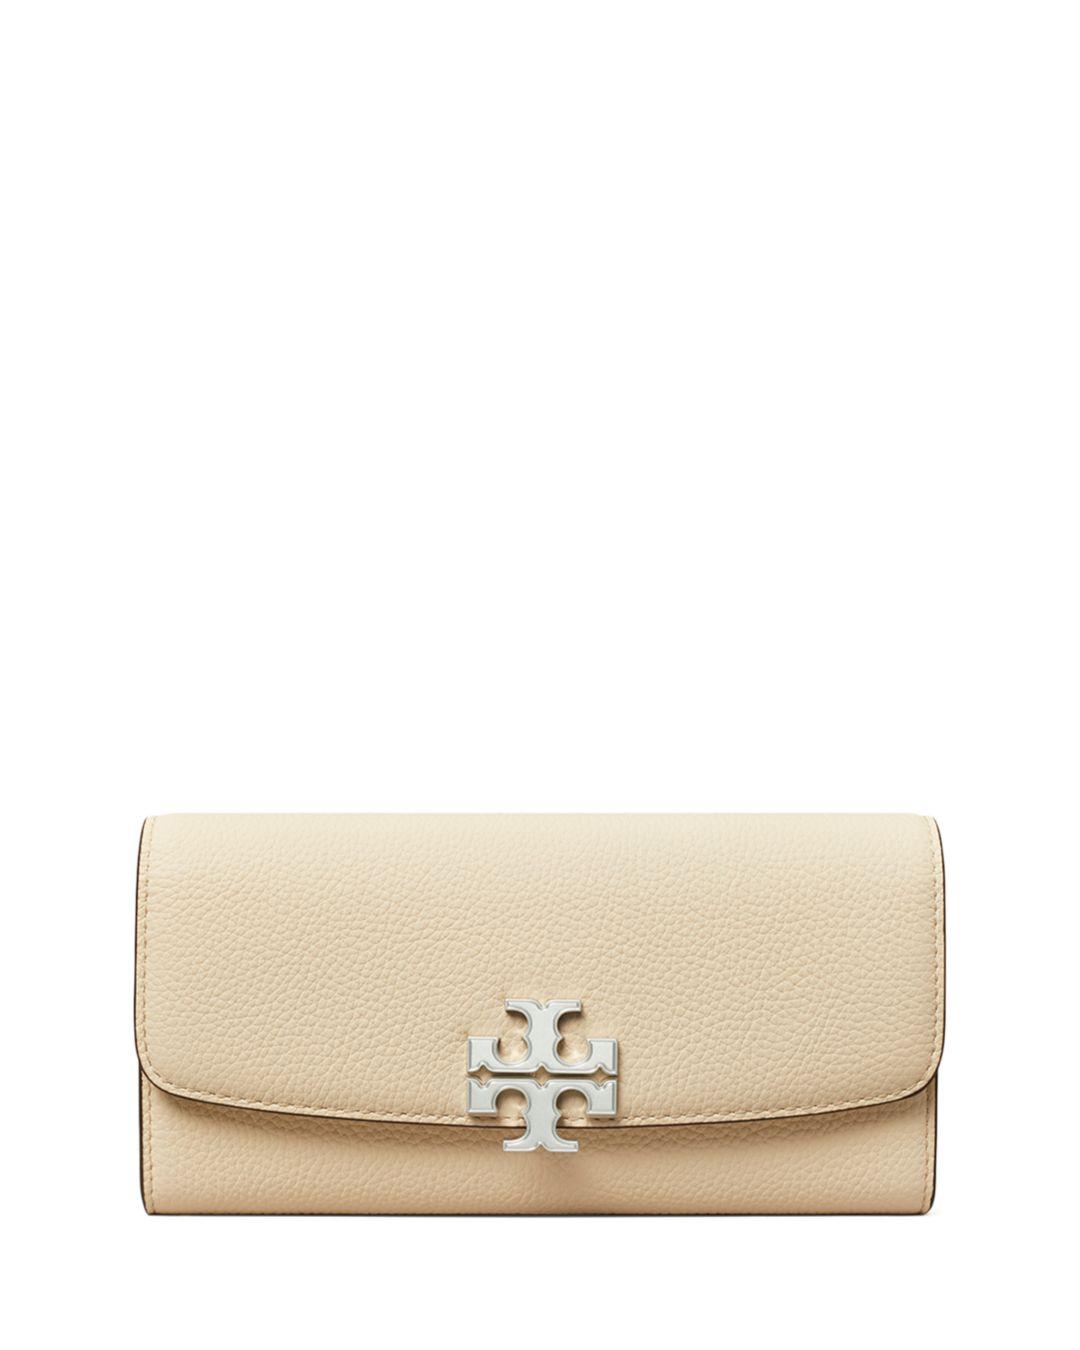 Tory Burch Eleanor Pebbled Envelope Wallet in Natural | Lyst Canada